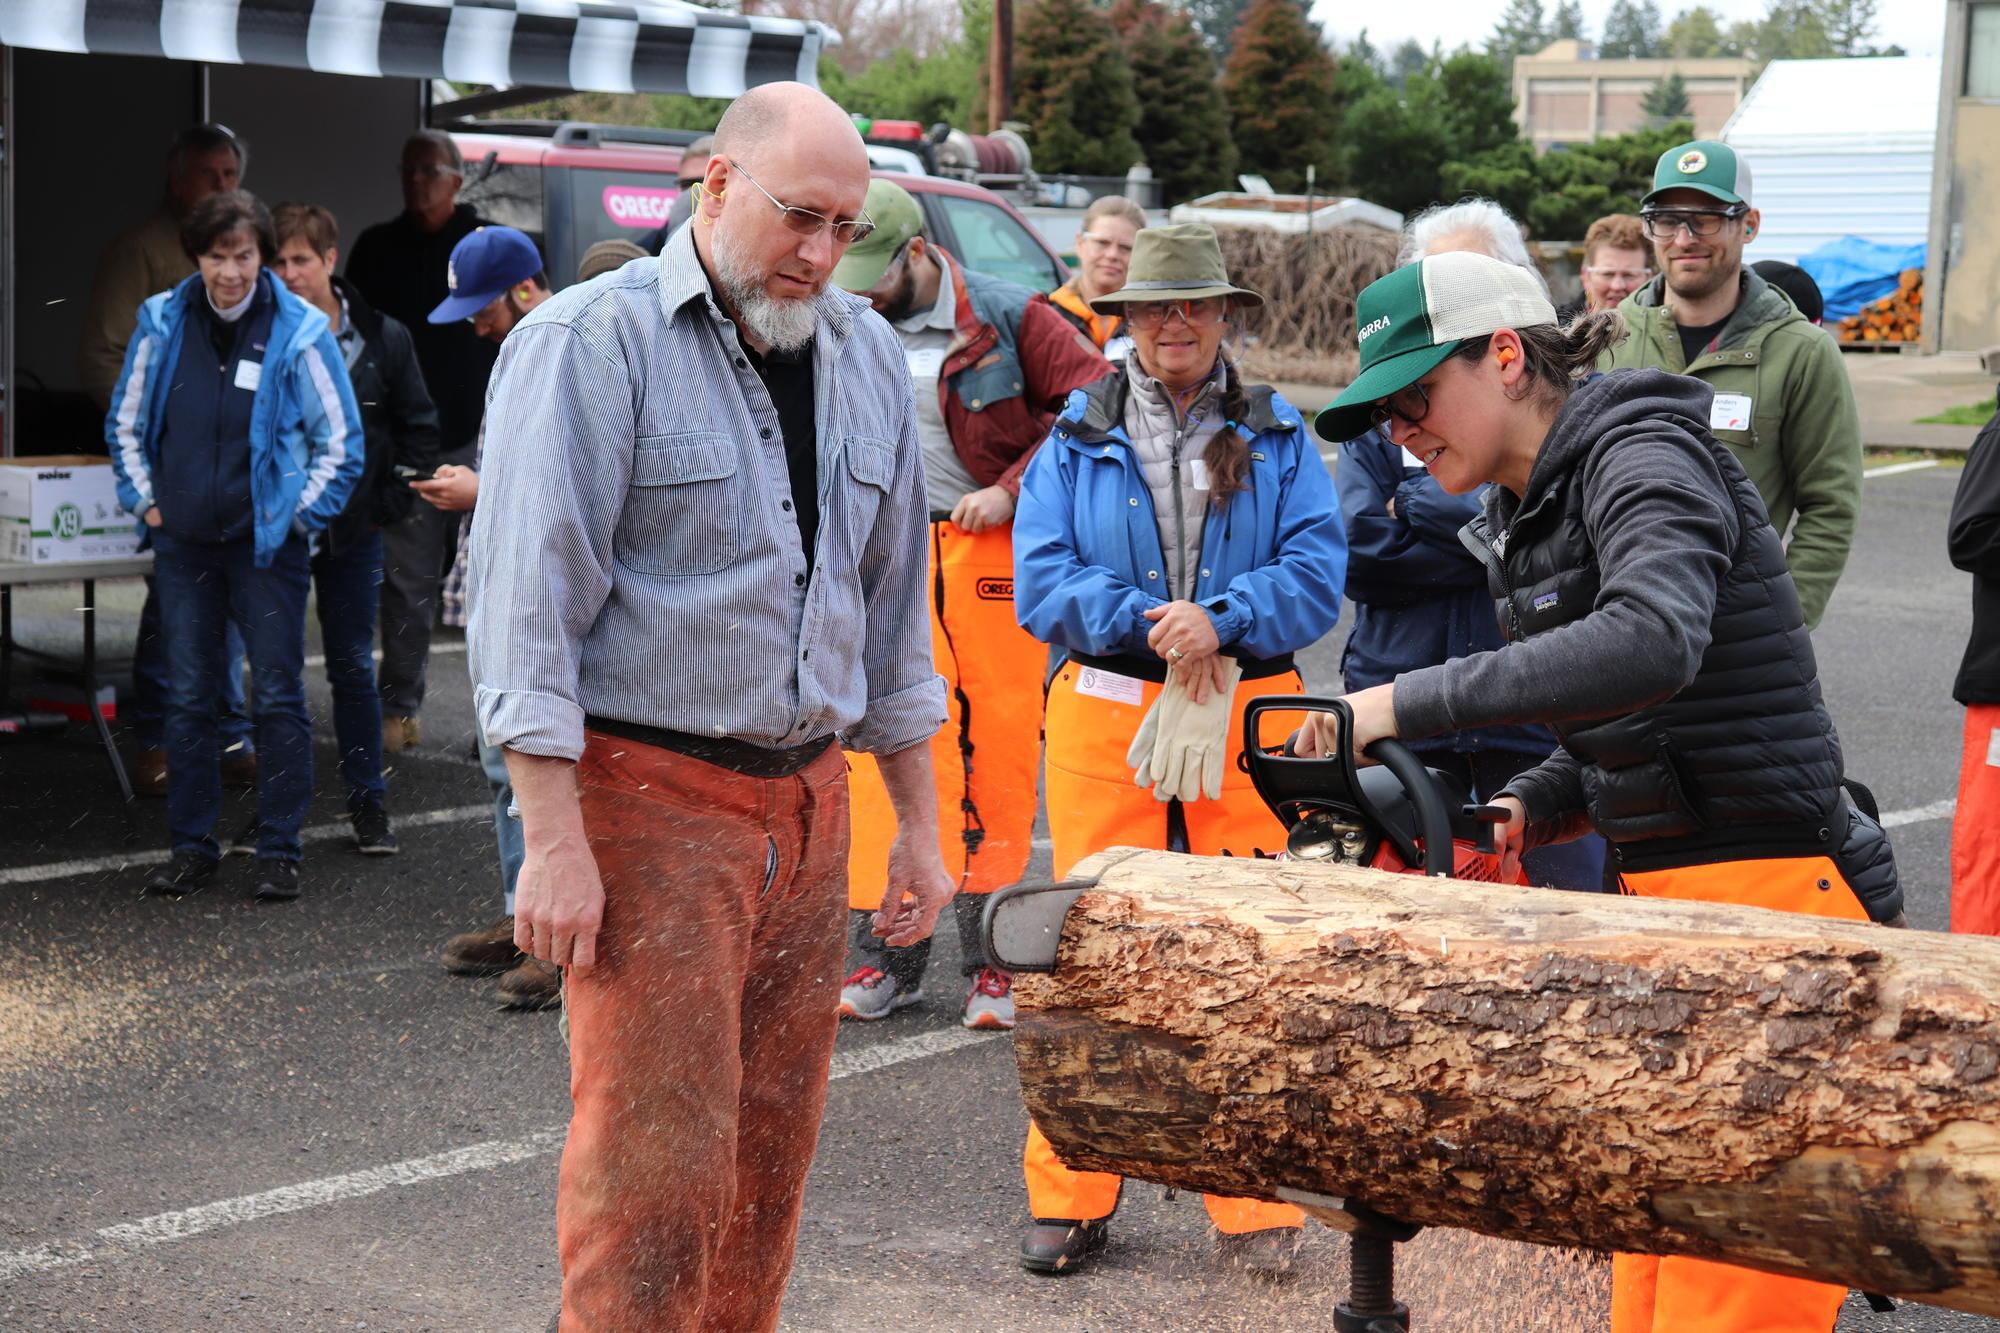 Operating Chainsaws Safely class taught by Oregon Tool at Tree School Clackamas 2019.